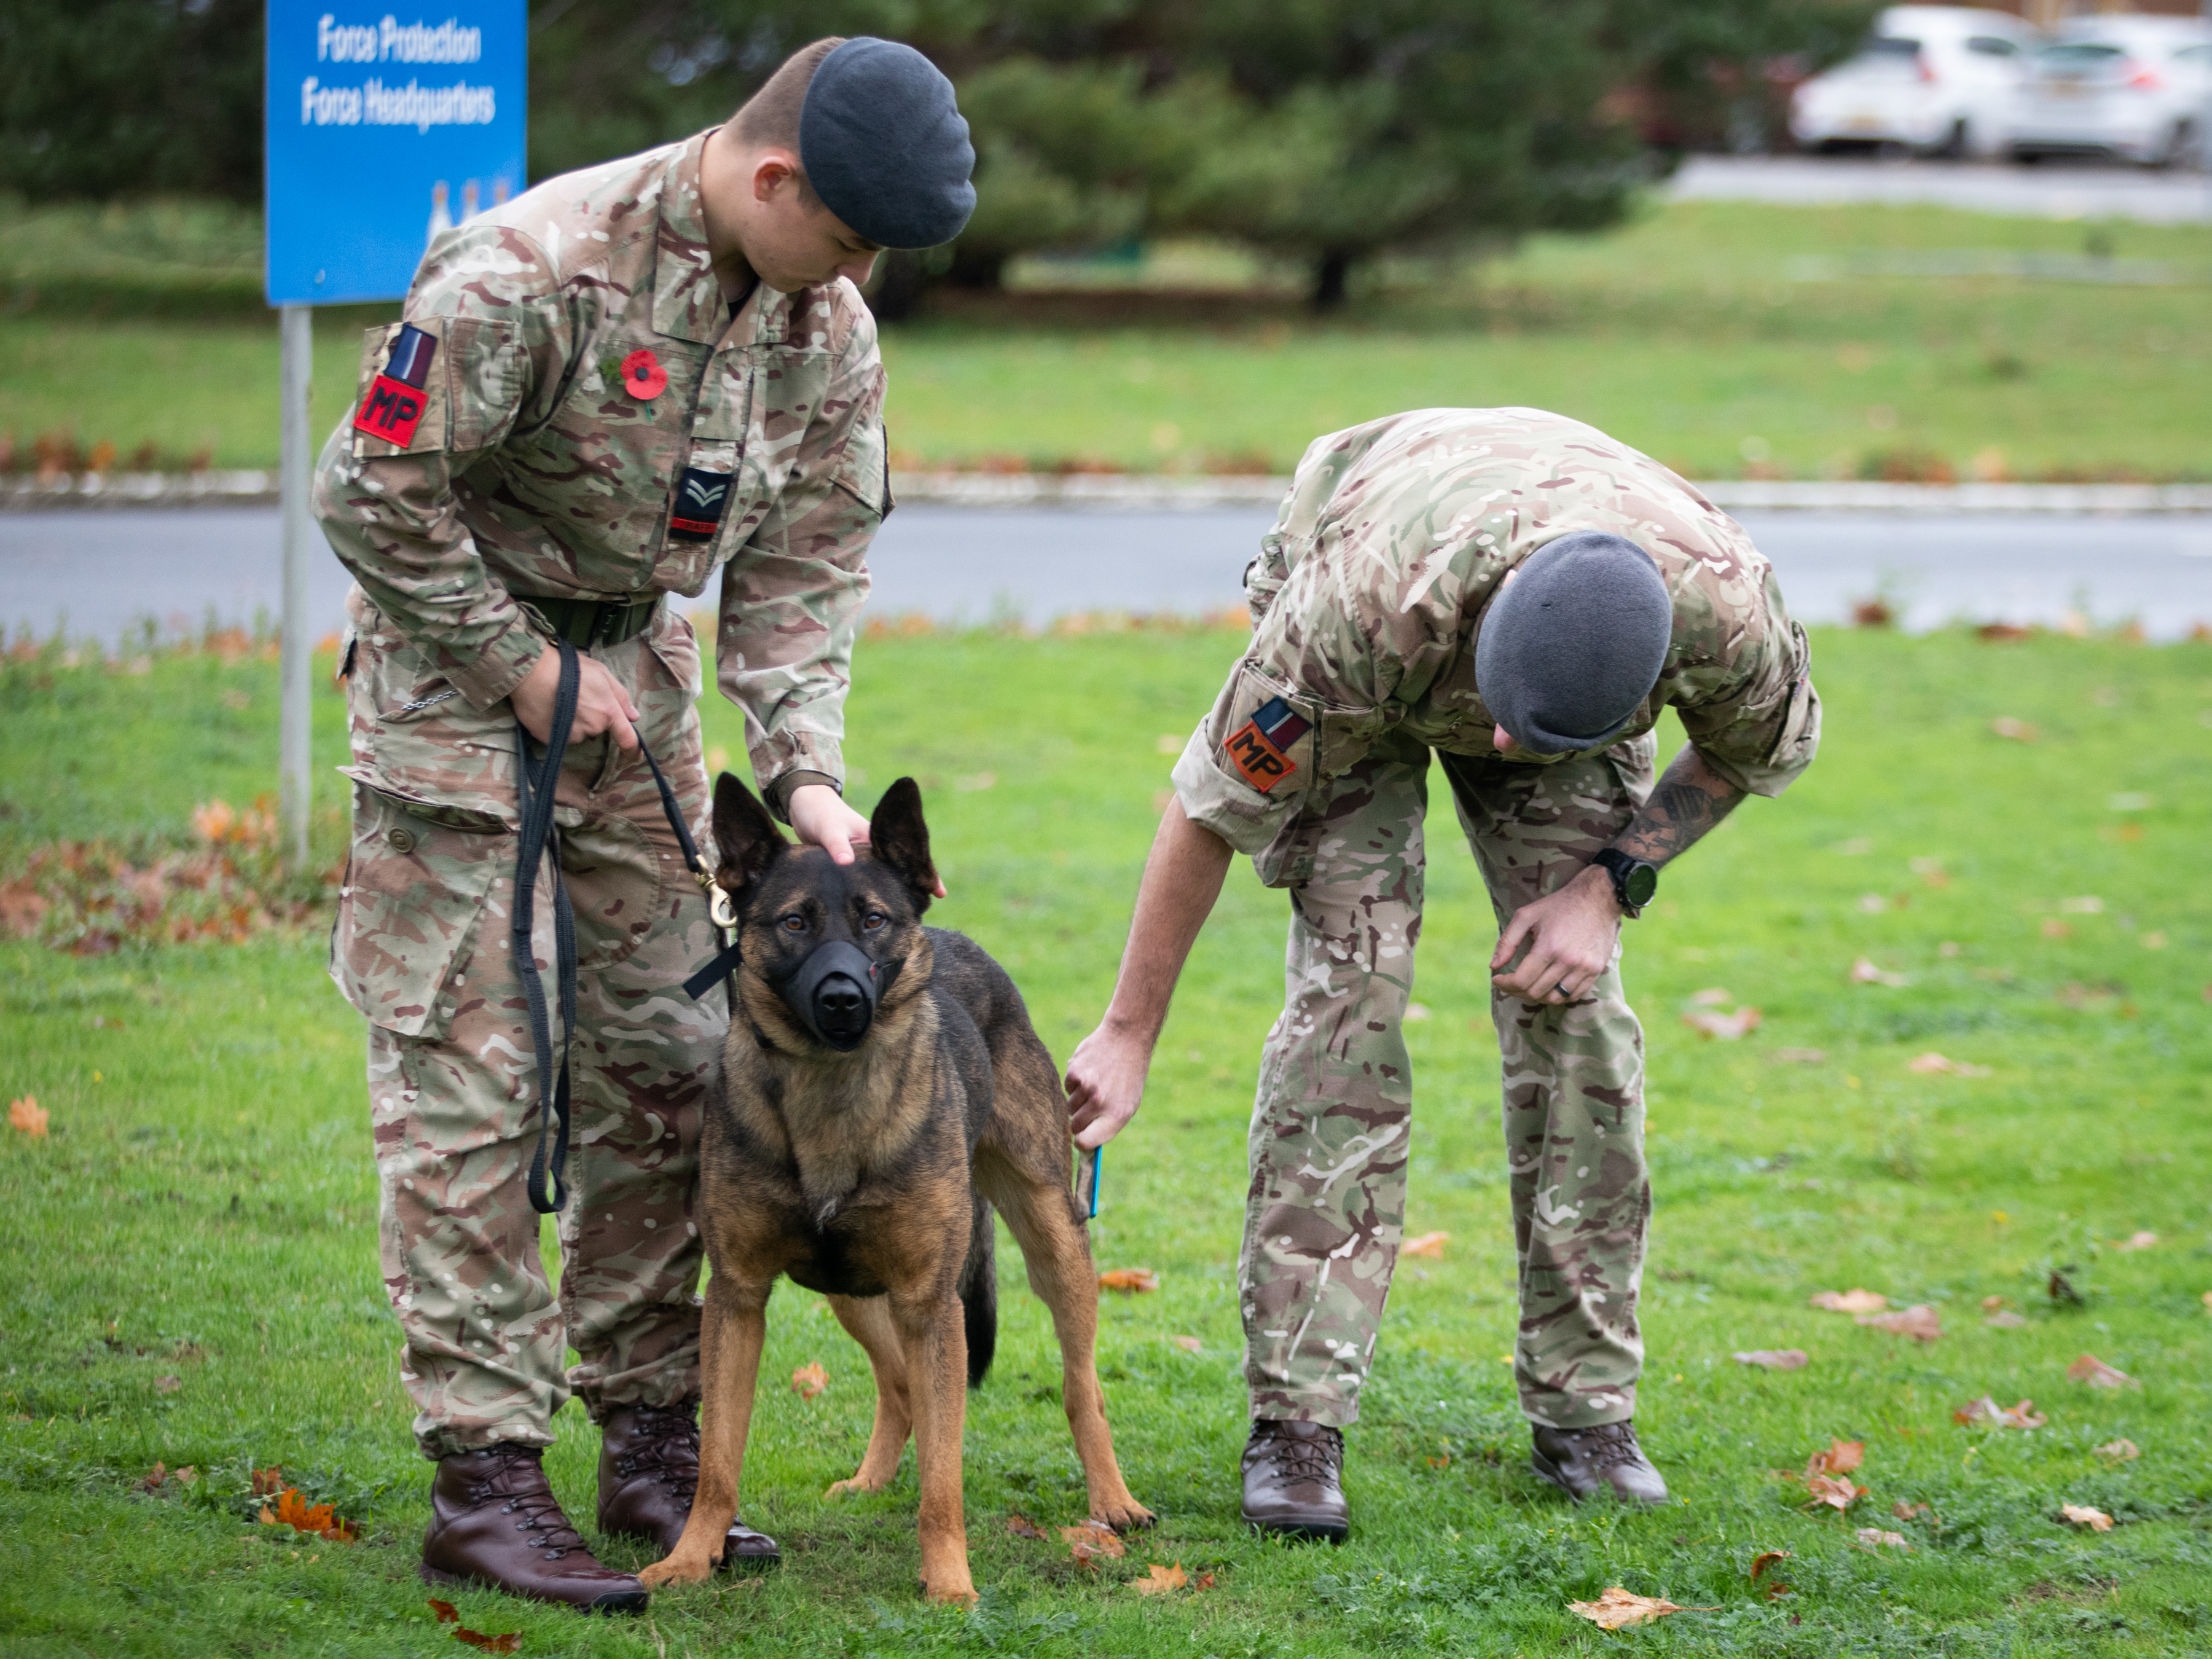 Image shows RAF Police with Military Working Dog.